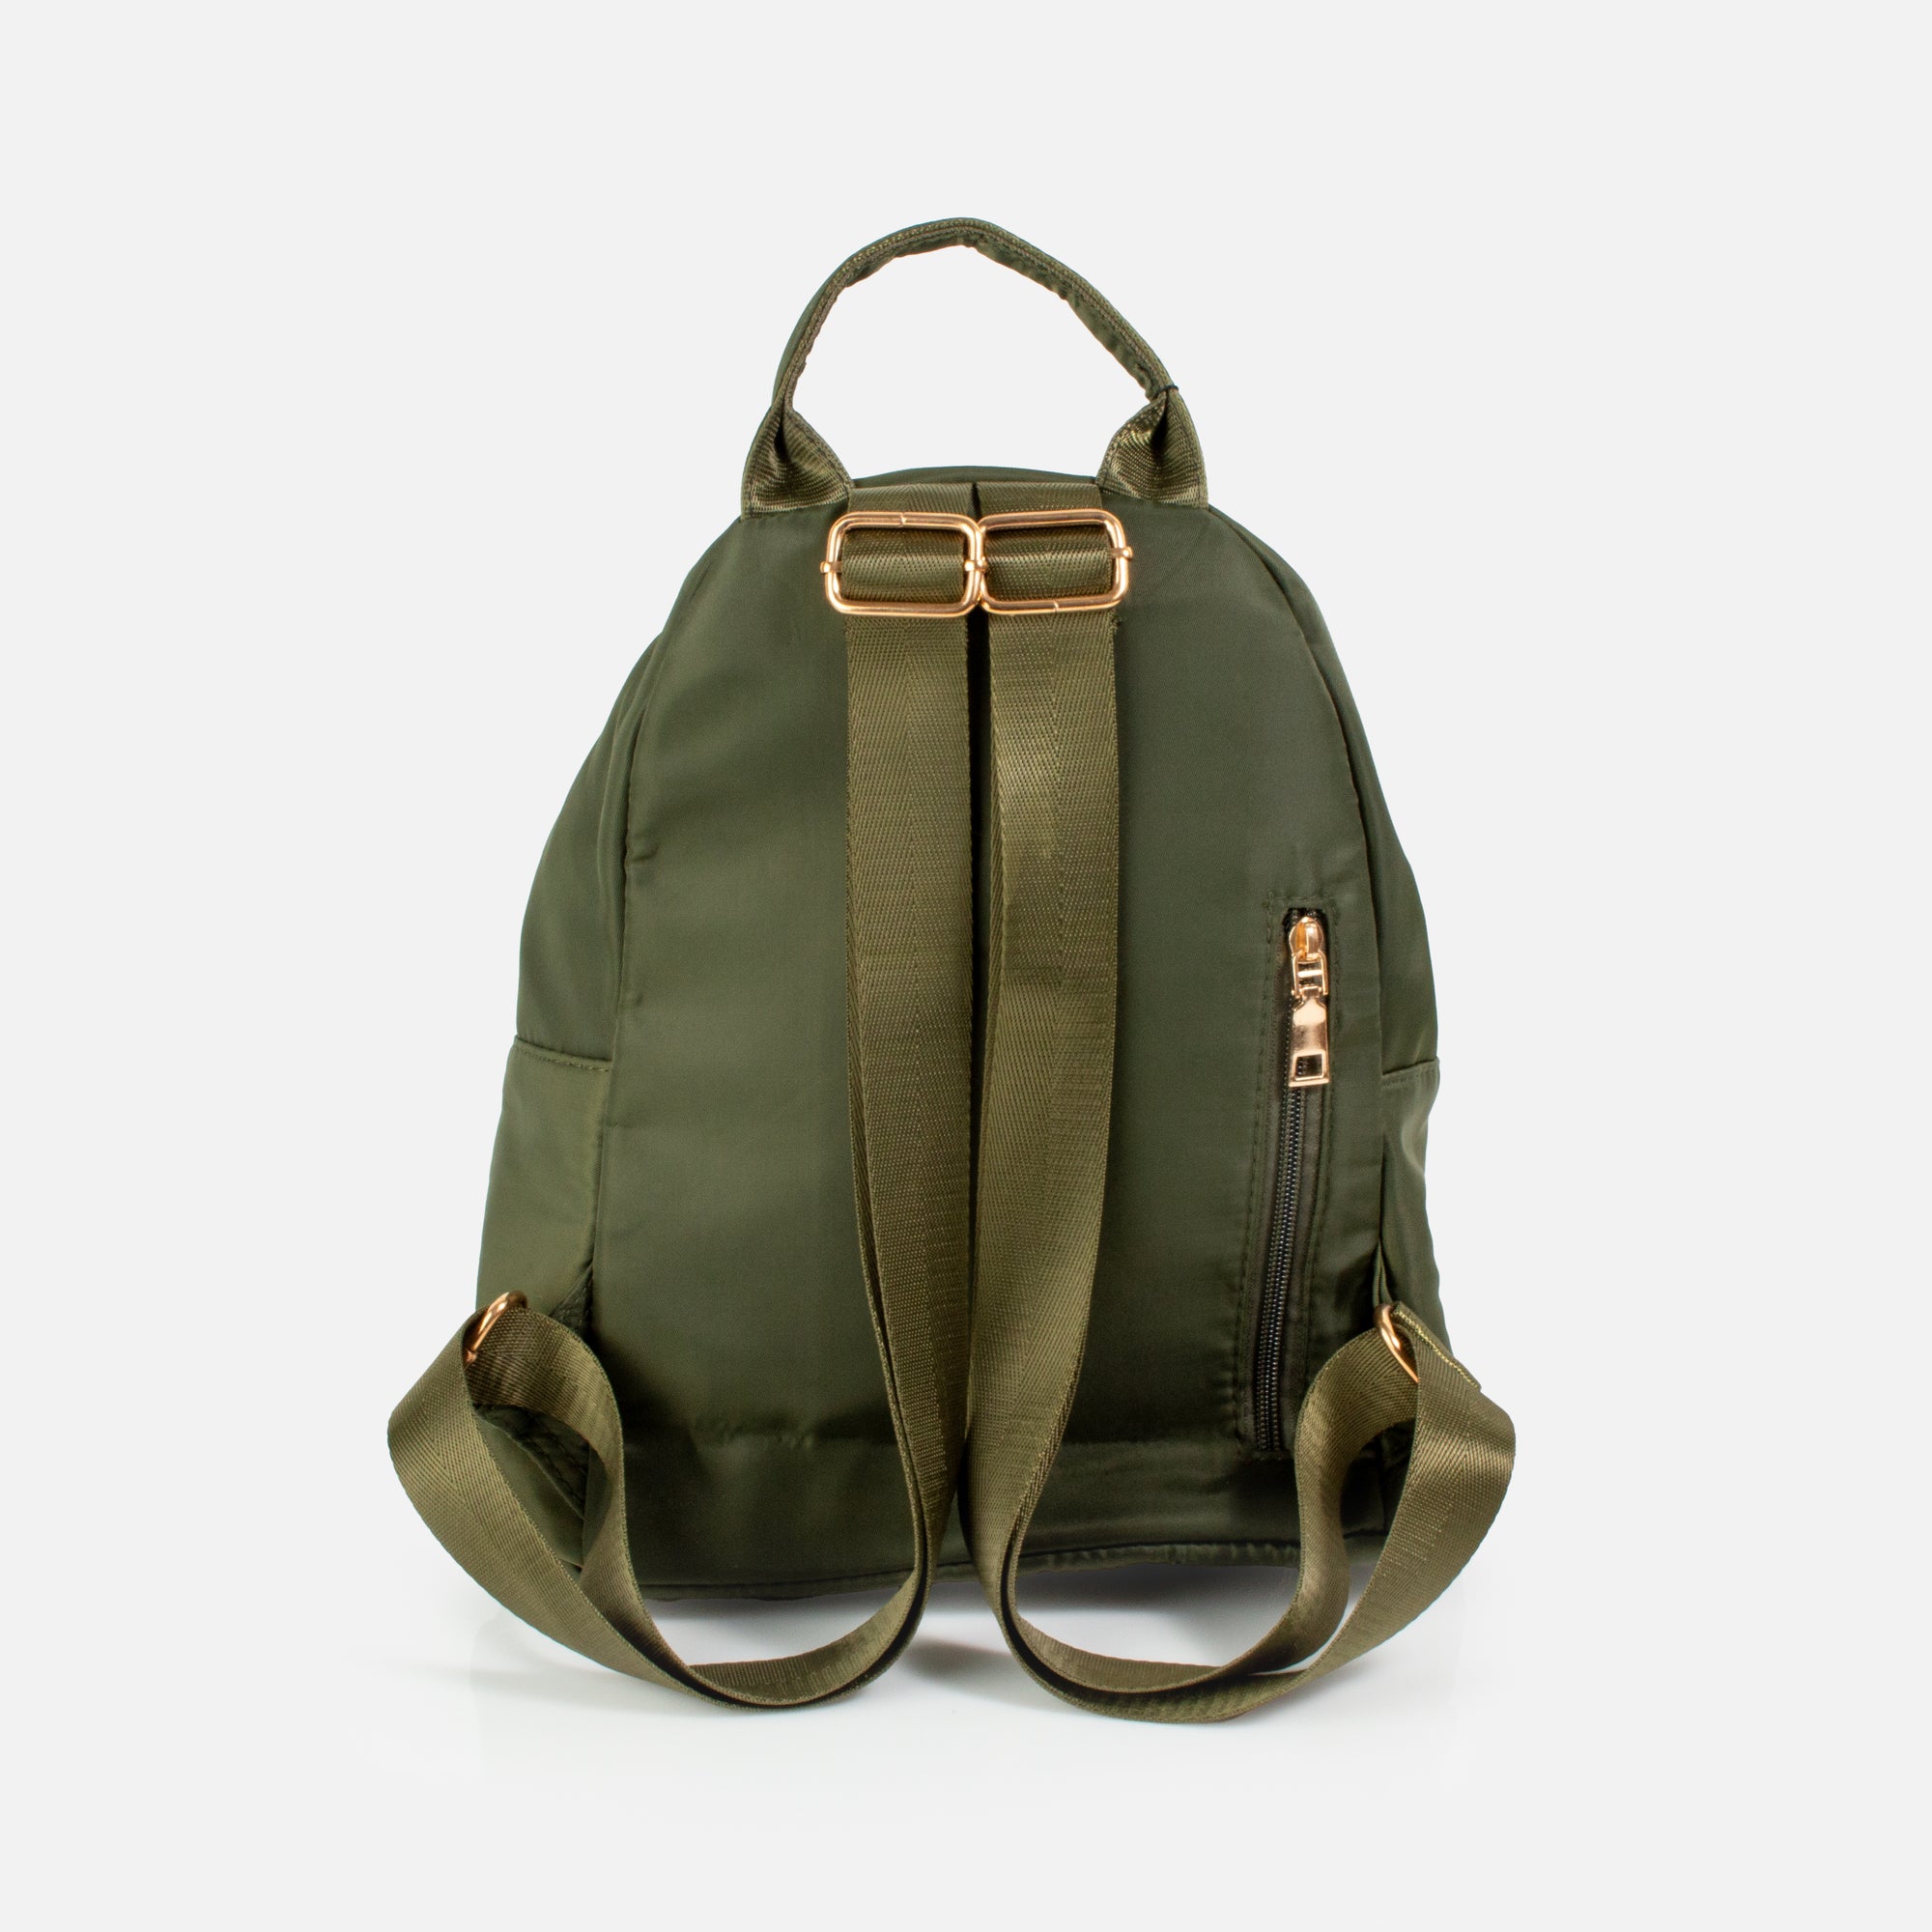 Lexus 40ltr Laptop Backpack Upto 15.6 Inches - Olive Green at Rs 1699.00 |  Laptop Backpack | ID: 25177294712